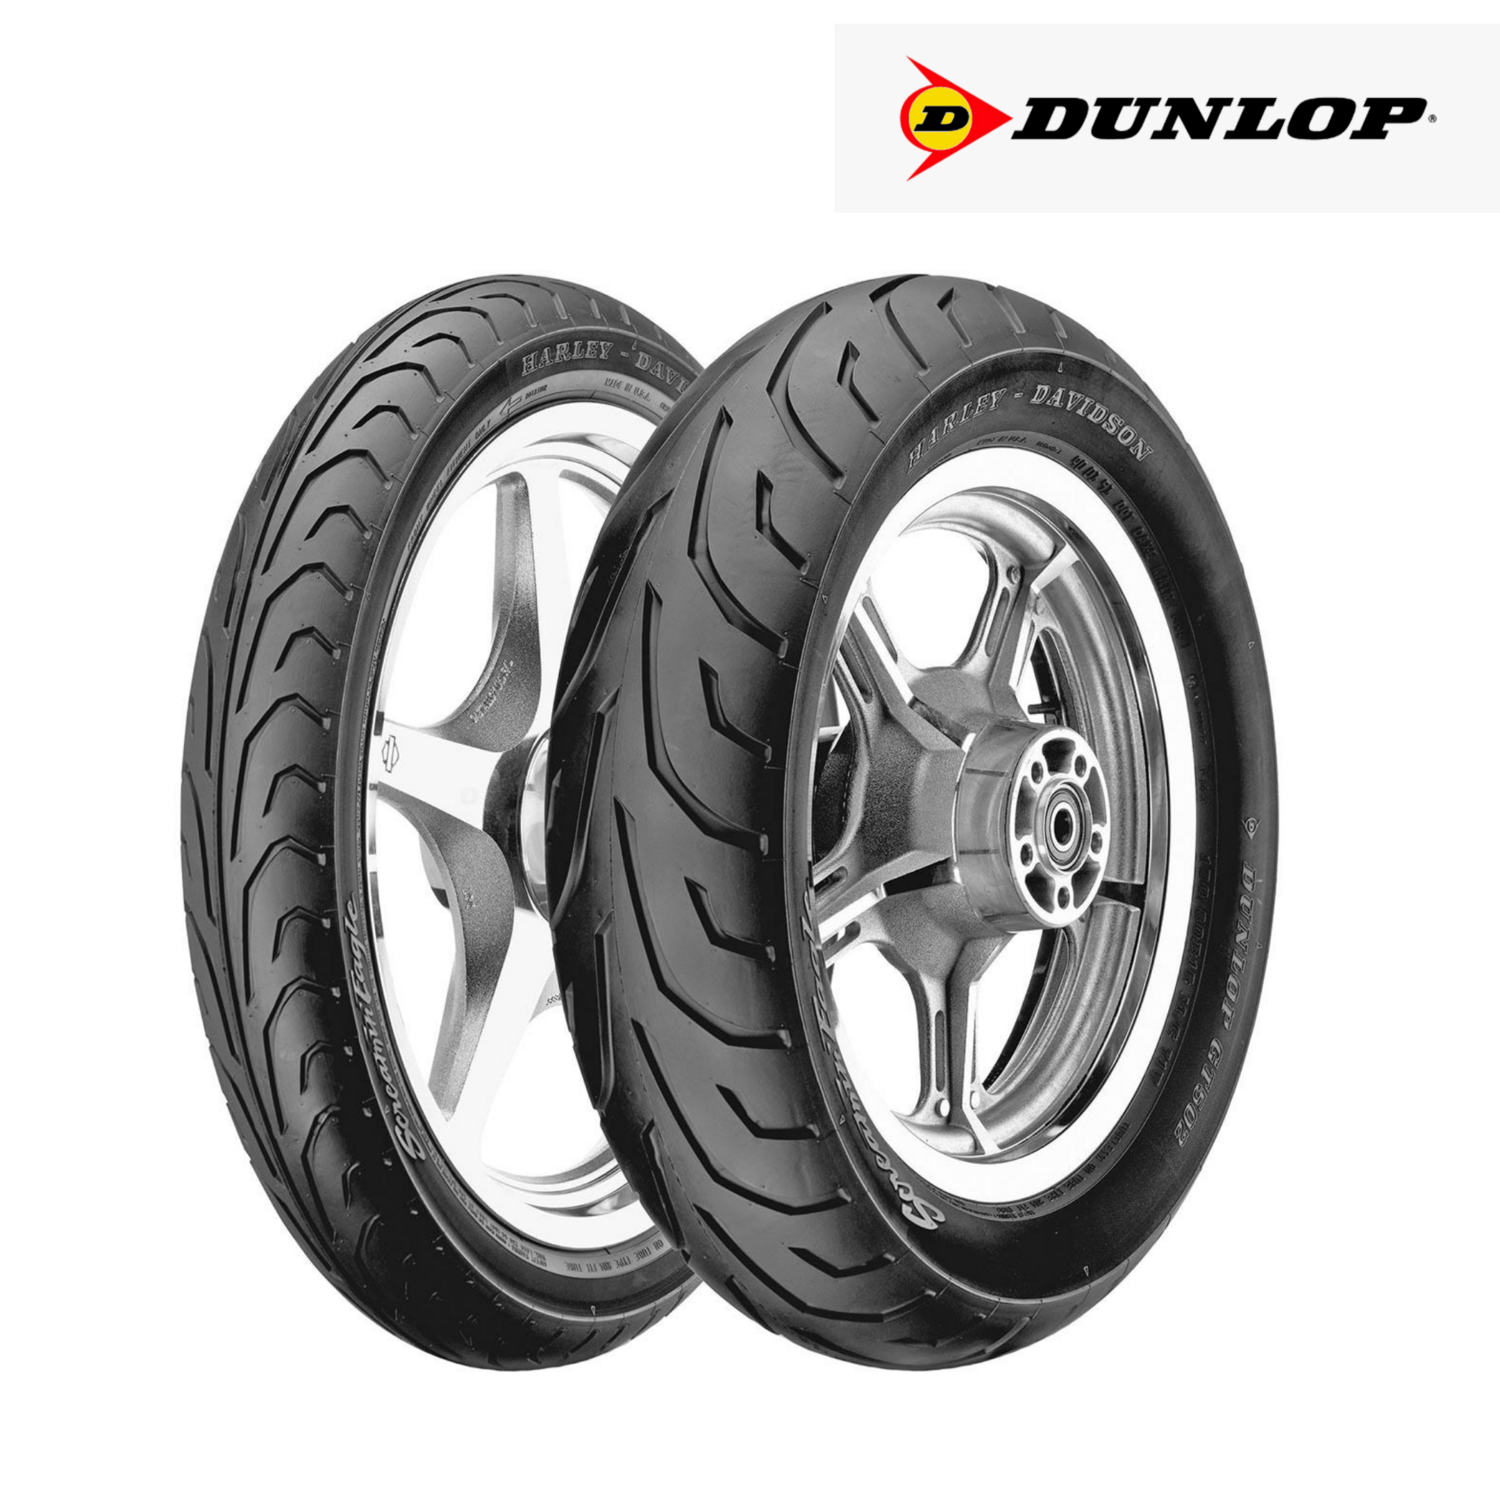 DUNLOP GT502 F 120/70R19 60 V Tubeless Front Two-Wheeler Tyre